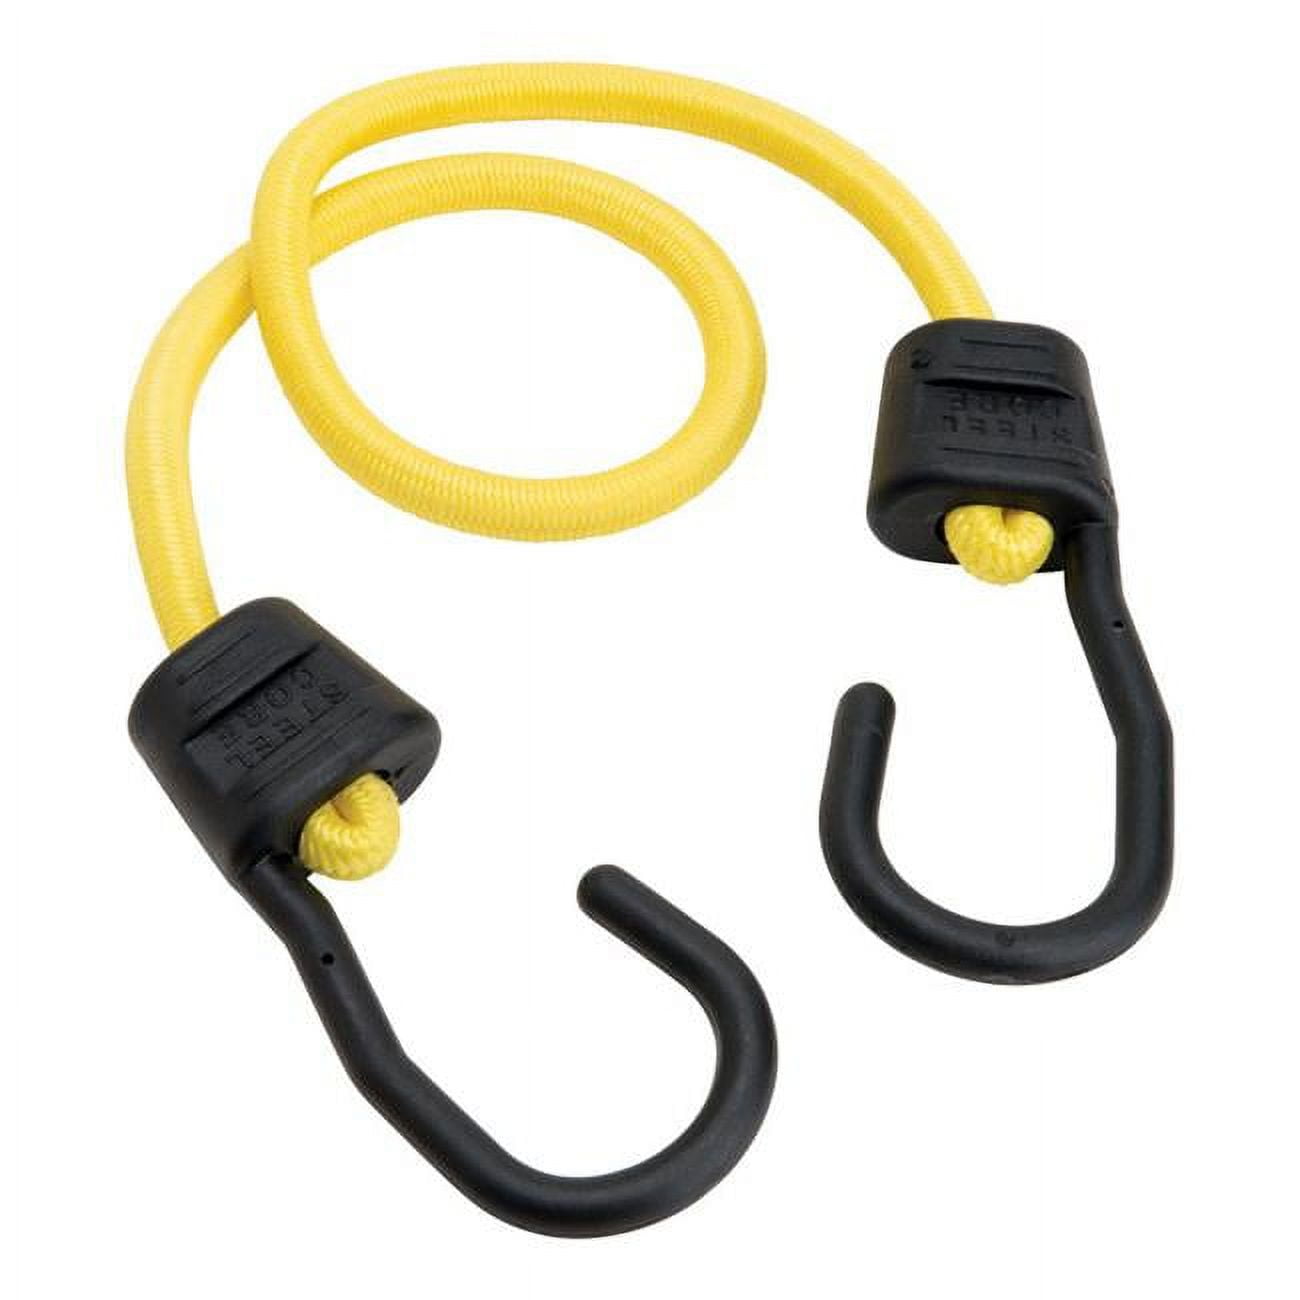 8865727 Ultra Yellow Bungee Cord, 24 X 0.374 In. - Case Of 10